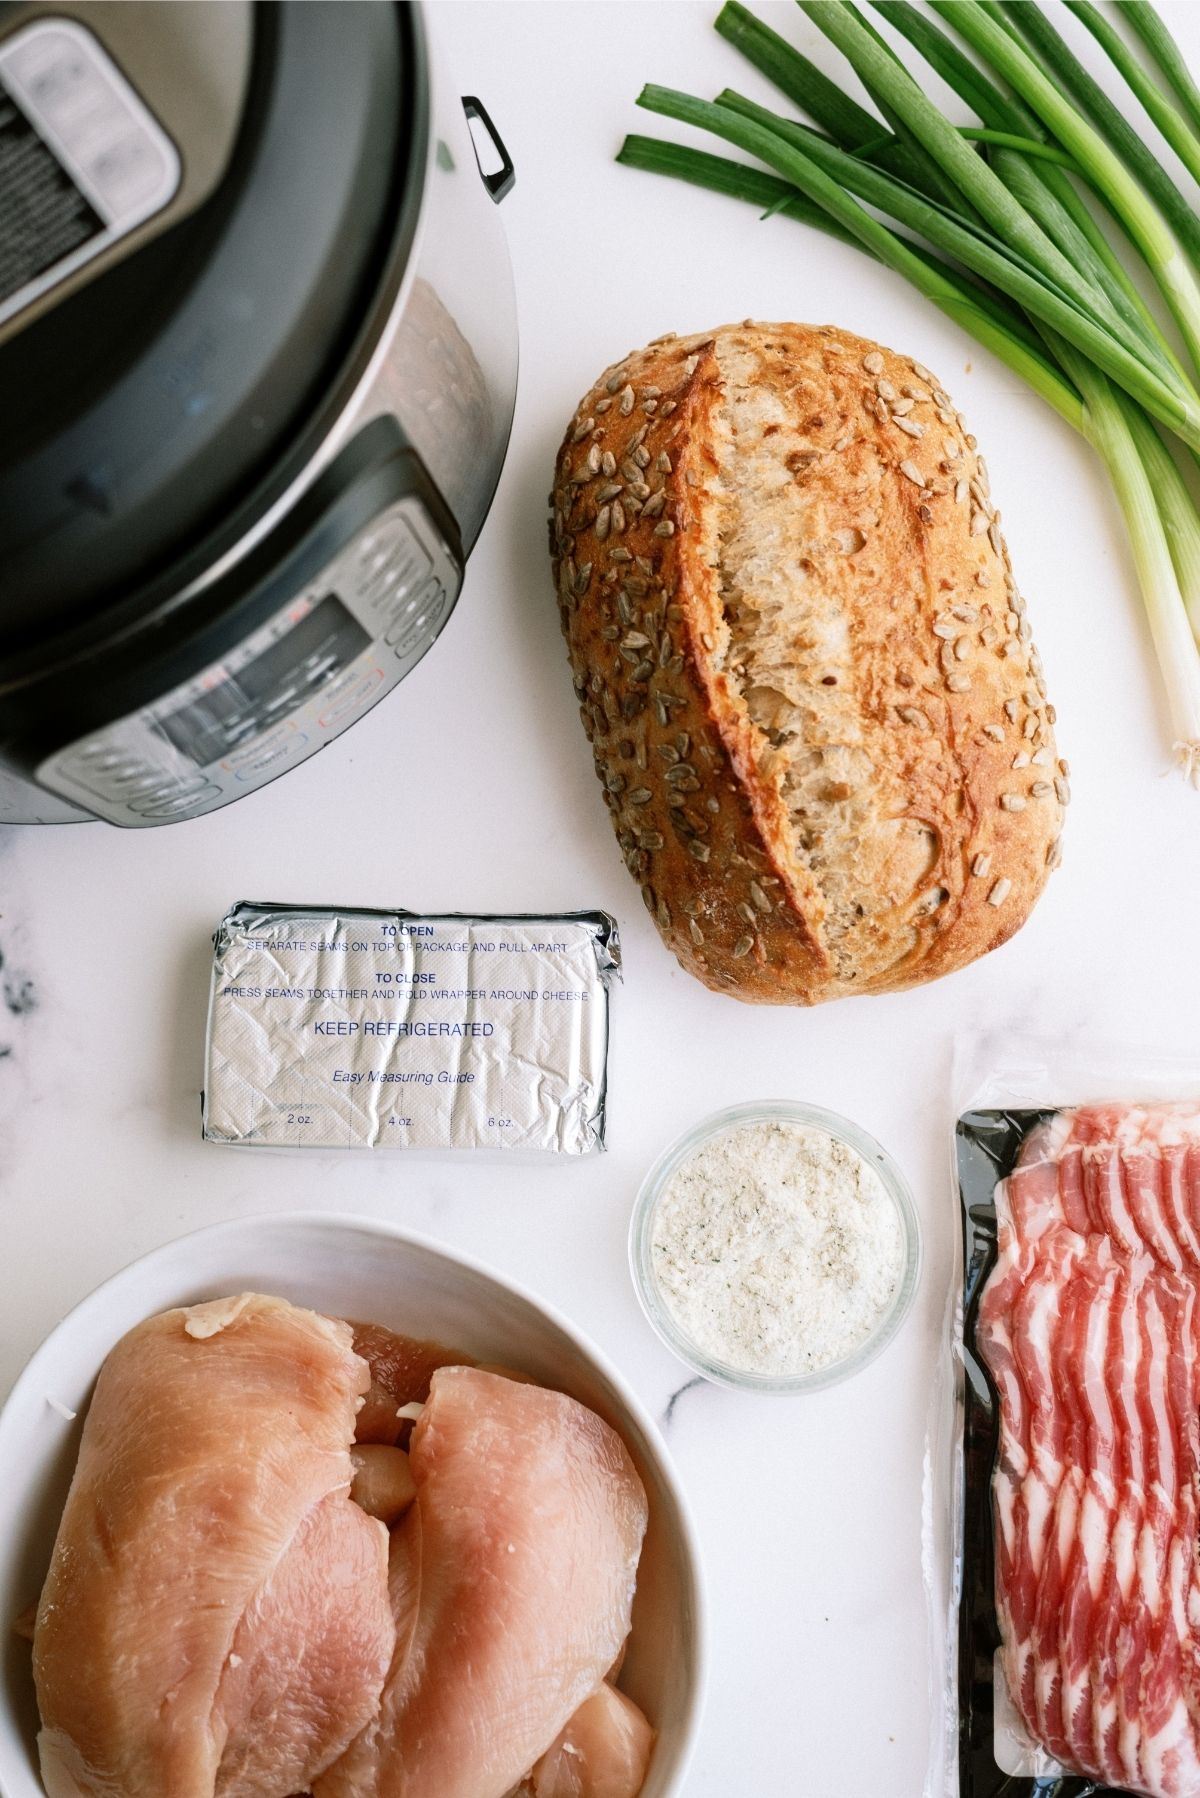 Ingredients for Instant Pot Chicken Bacon Ranch Sandwiches